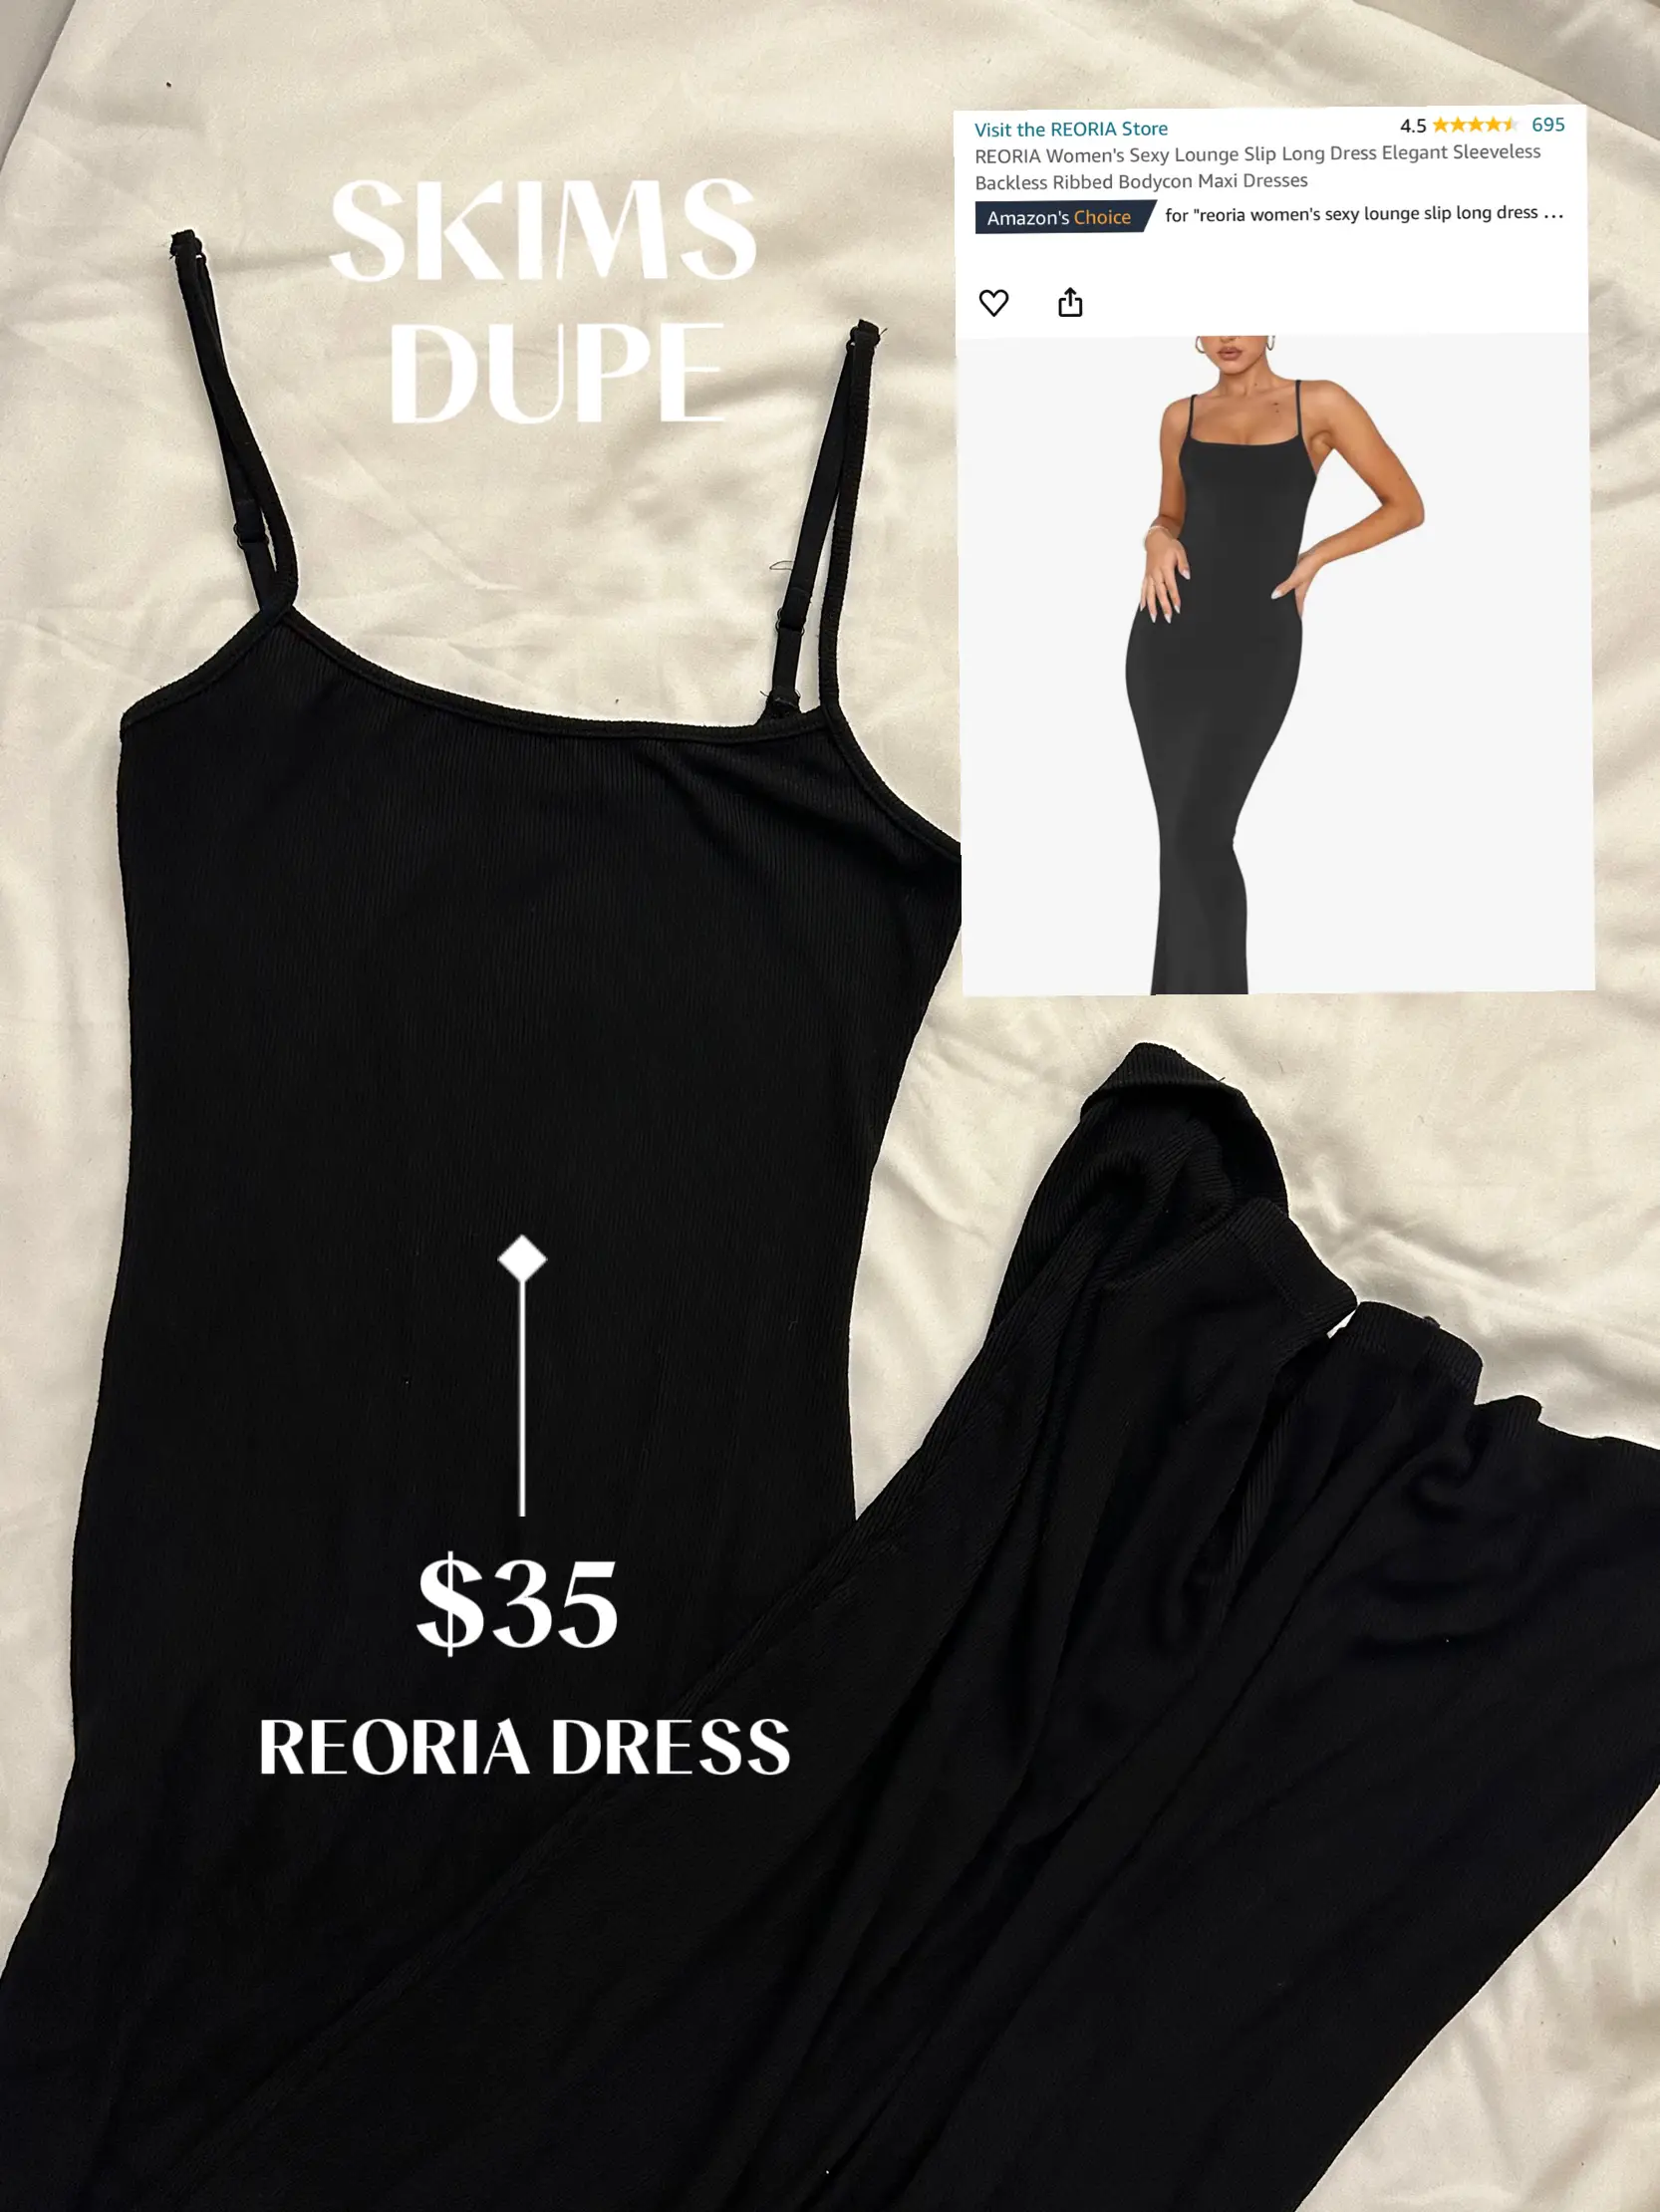 Lululemon Align Top Dupe ✨, Gallery posted by Luisa Nunez